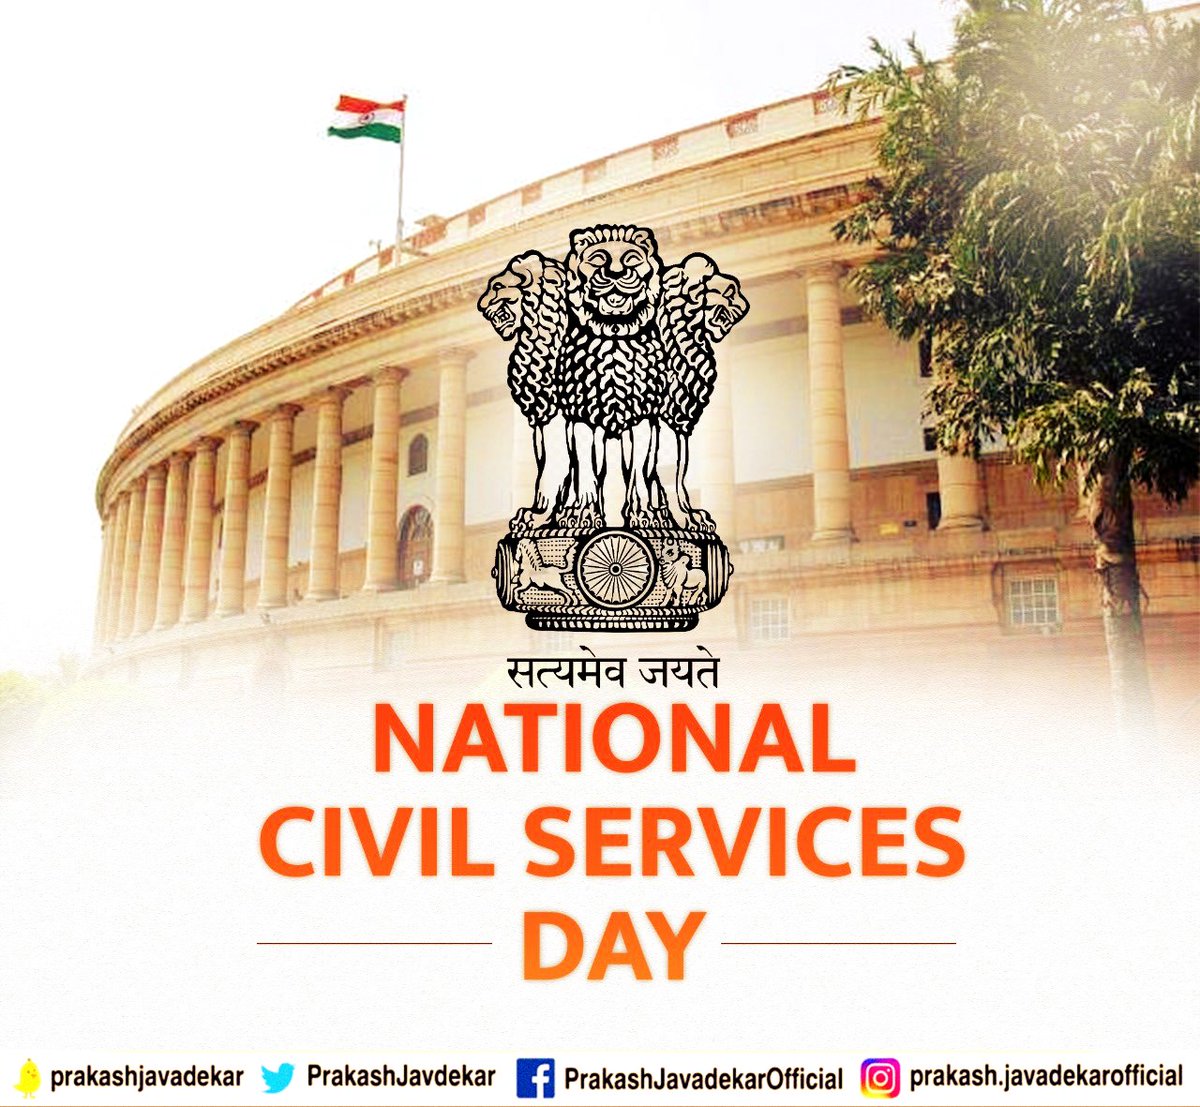 Greetings on ' #CivilServiceDay ' to all the civil services officers who are dedicatedly working & striving for the welfare of the citizens and our nation with integrity.

Best wishes to contribute towards shaping a #ViksitBharat in this #AmritKaal !

#CivilServicesDay2023